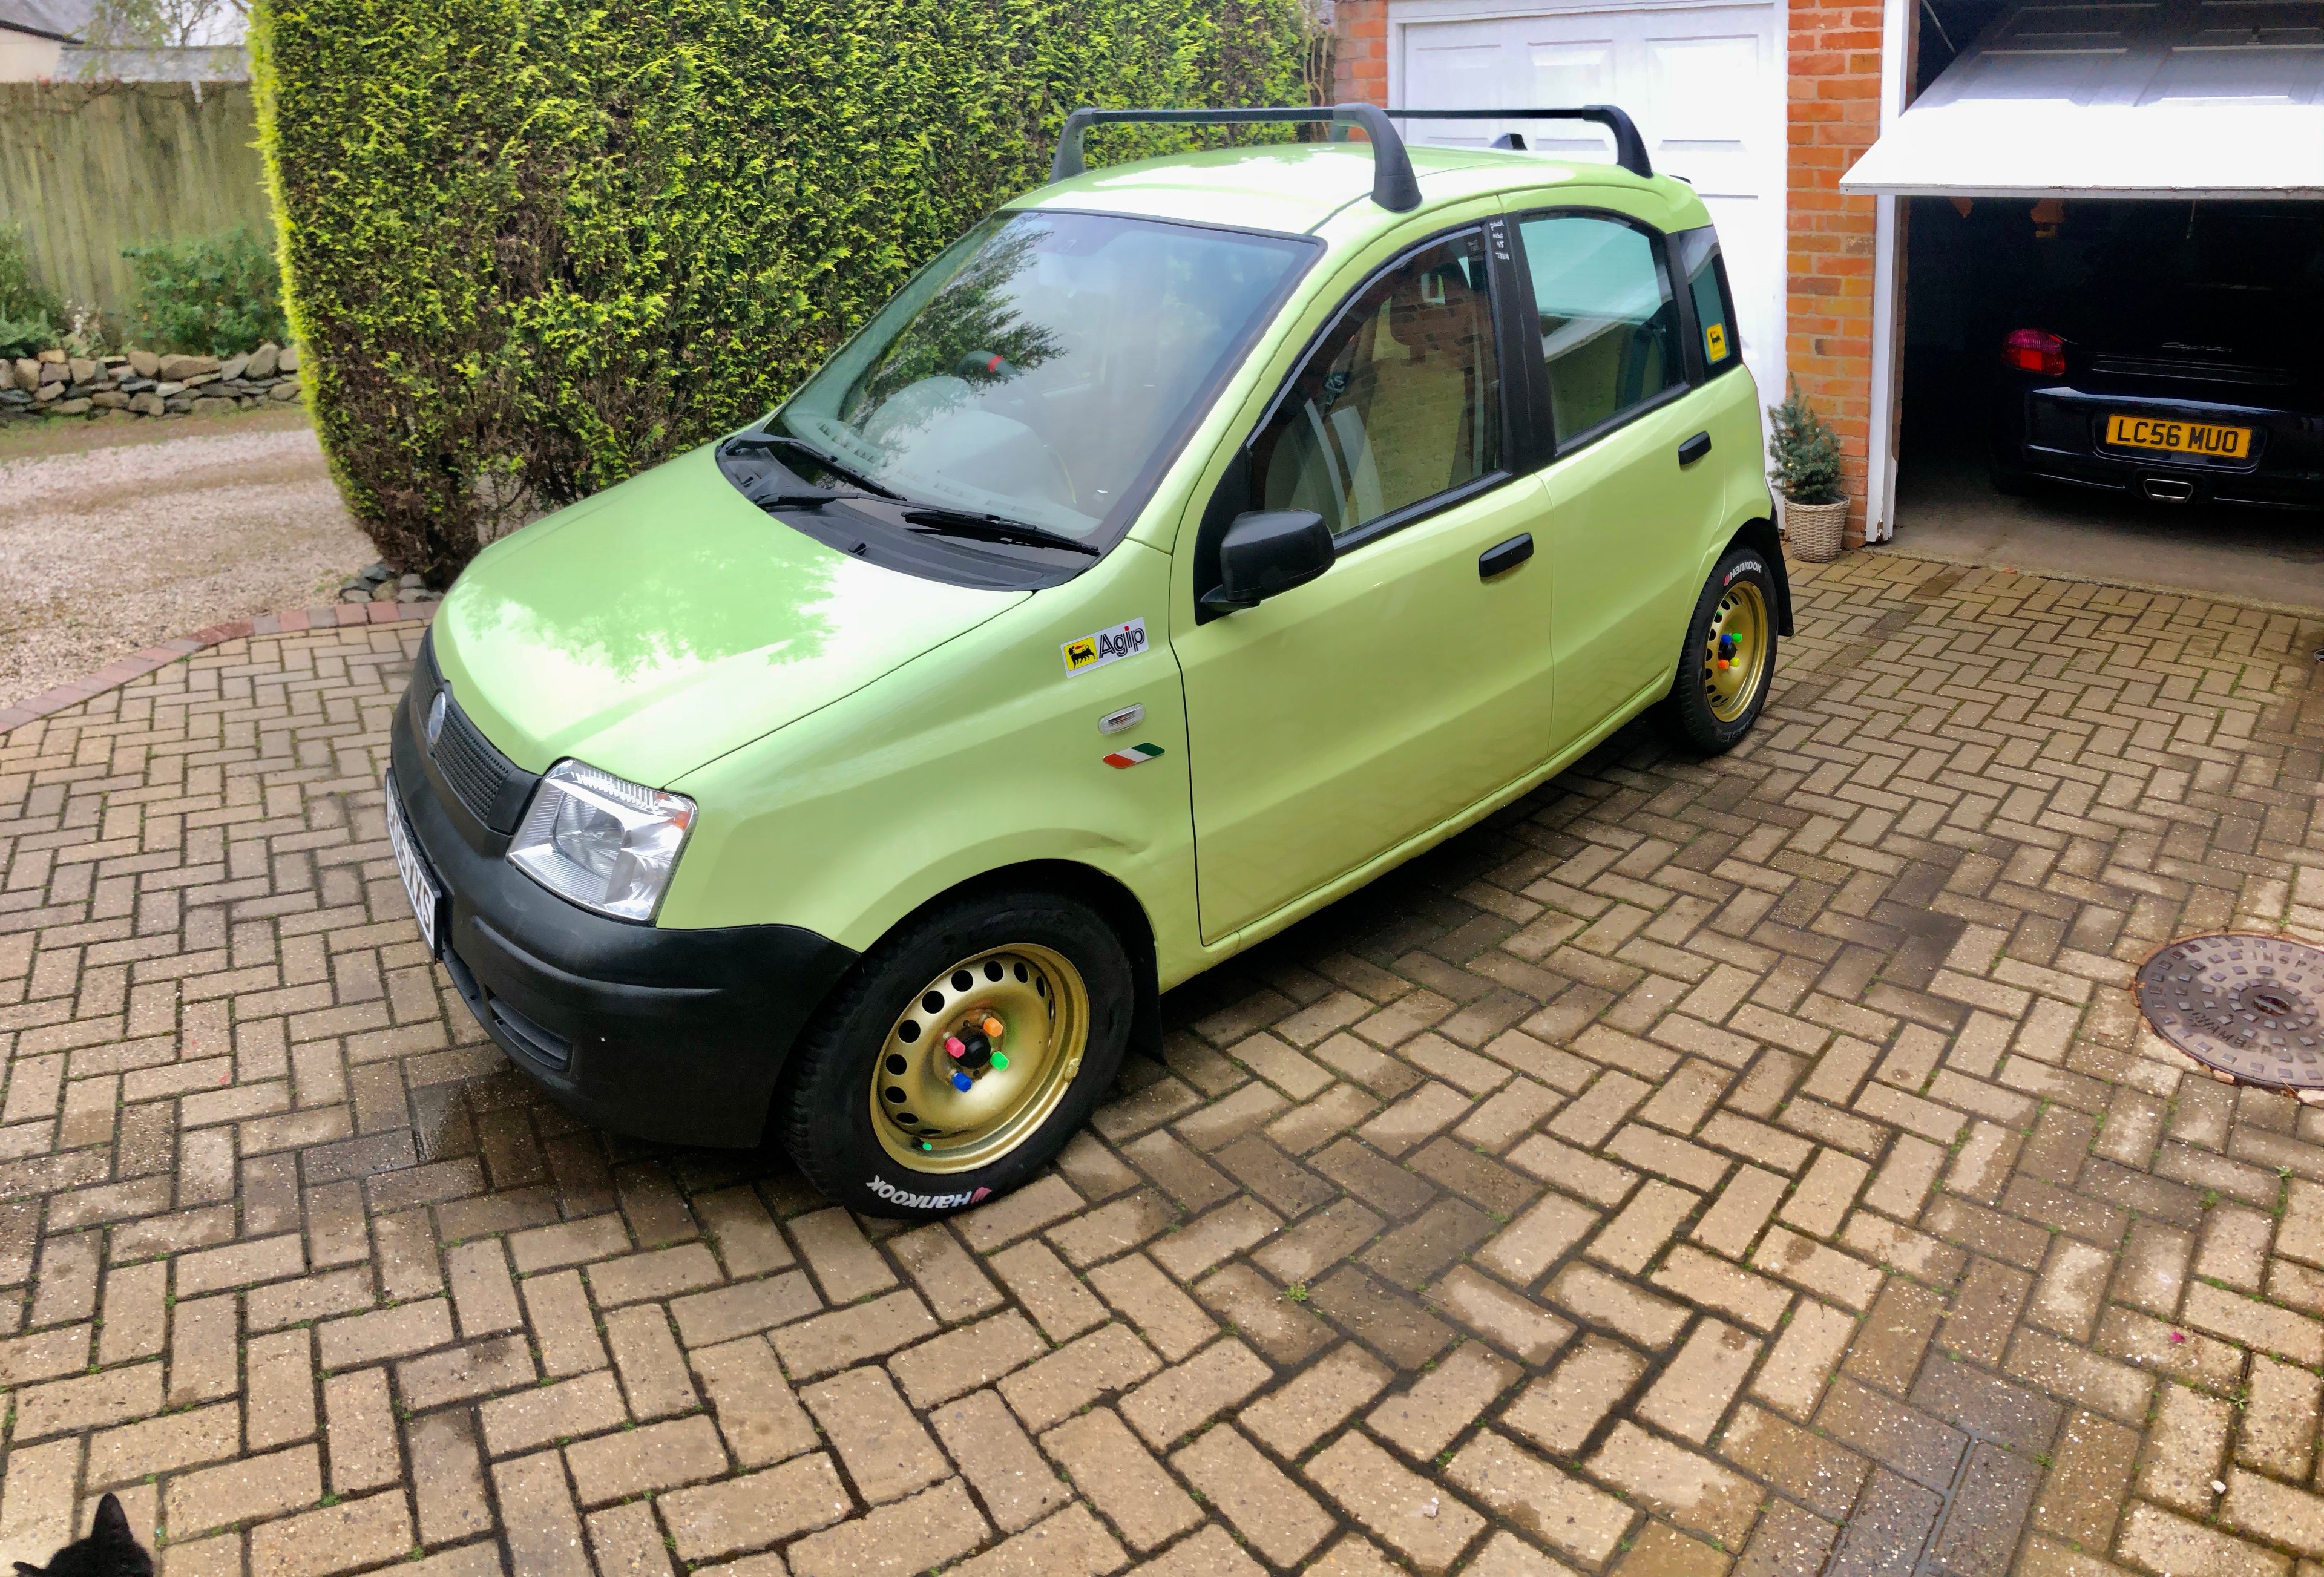 Fiat Panda 1.1 Active - Page 2 - Readers' Cars - PistonHeads